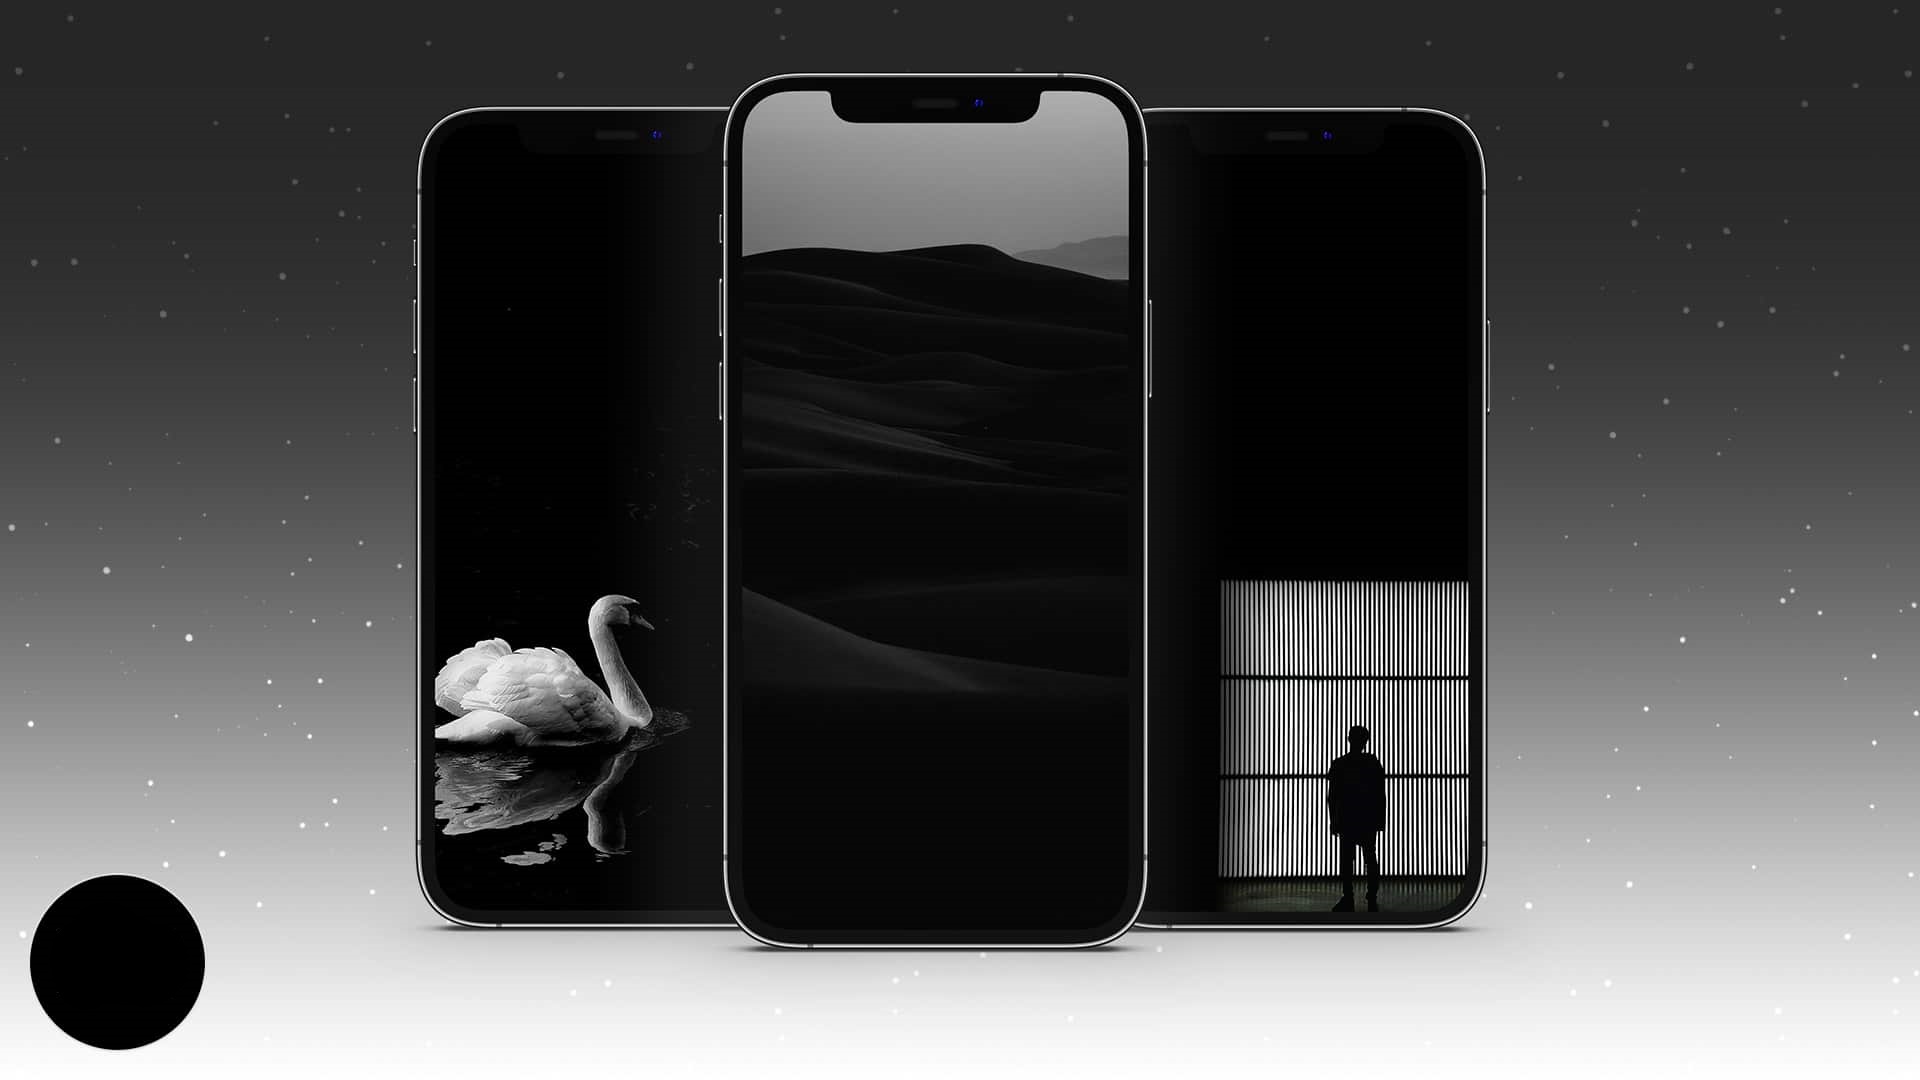 Black iPhone Wallpapers: The Magic Black Wallpaper That Makes Your iPhone Dock And Folders Disappear Is Back